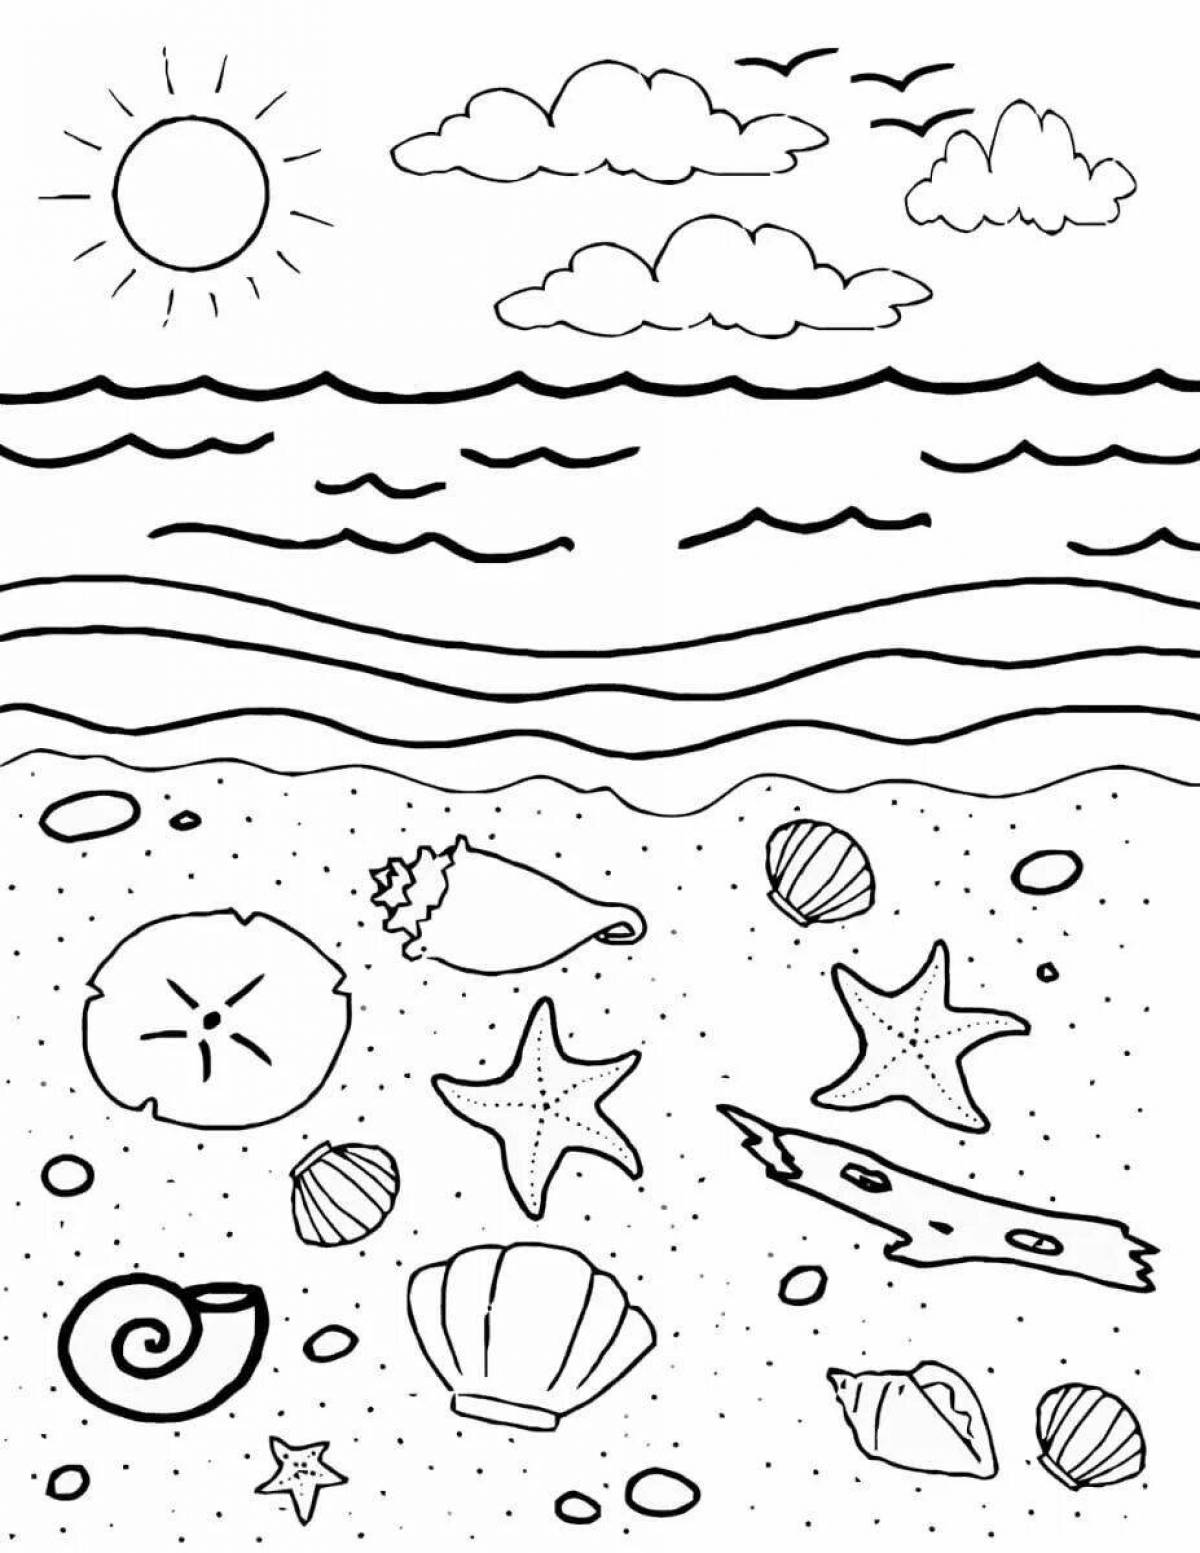 Colourful marine coloring book for kids